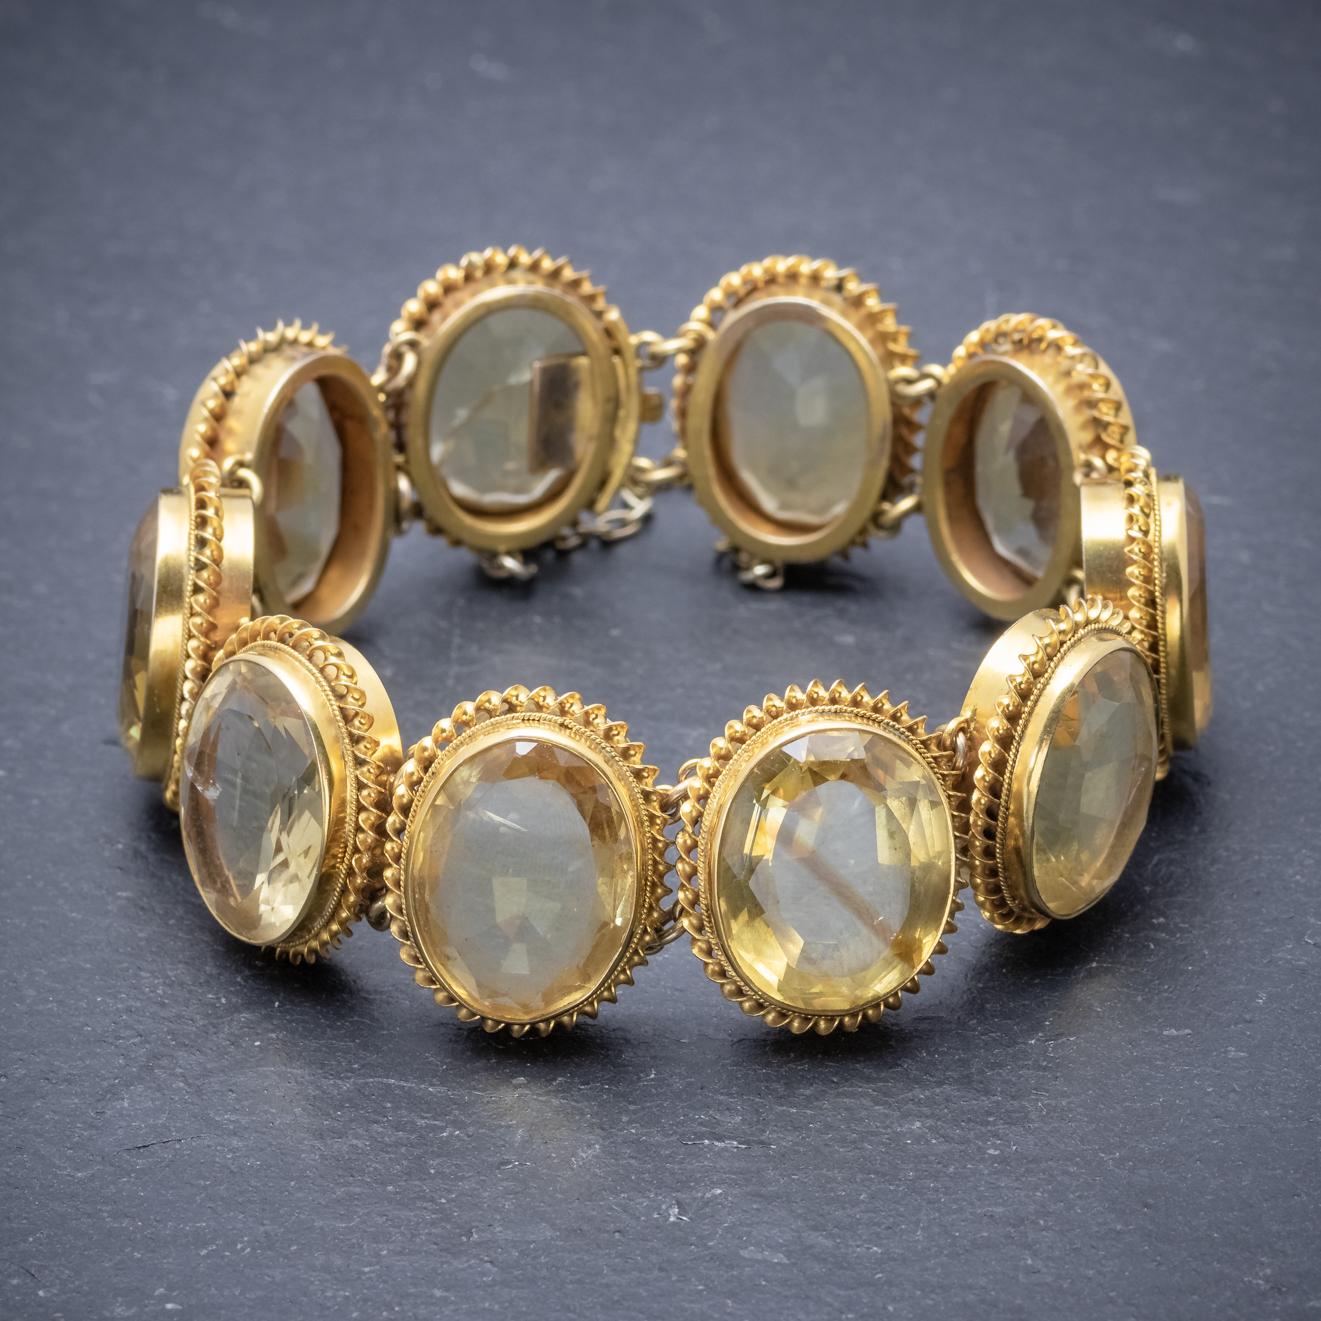 This beautiful antique Victorian bracelet is adorned with ten bright Citrines which glow with a lovely golden hue around the entire piece. Each stone is around 10ct, approx. 100ct in total. 

The stones are set in fancy Golden frames which are